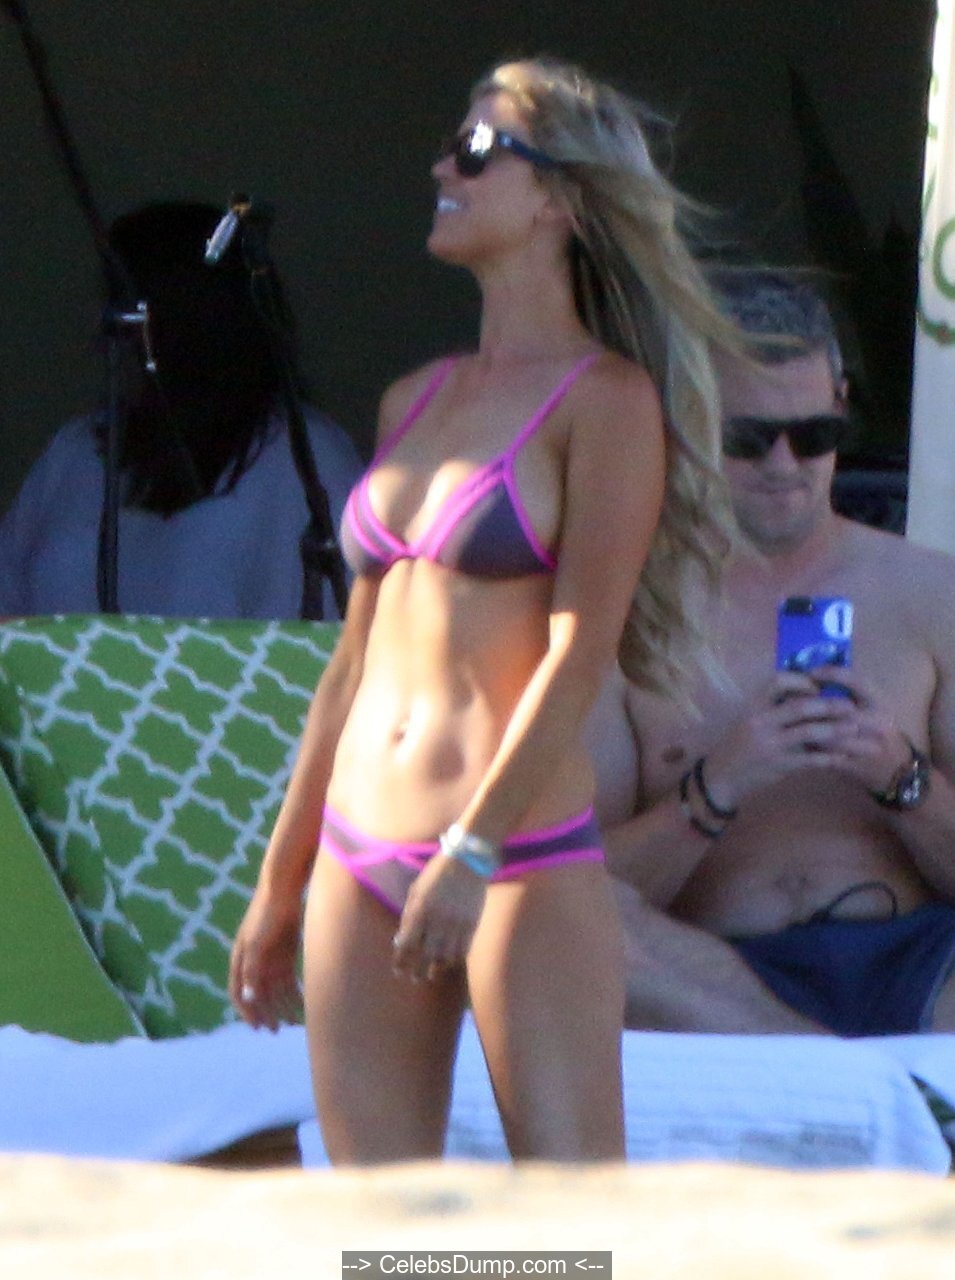 Christina El Moussa and Ant Anstead enjoy a day while sunbathing poolside d...